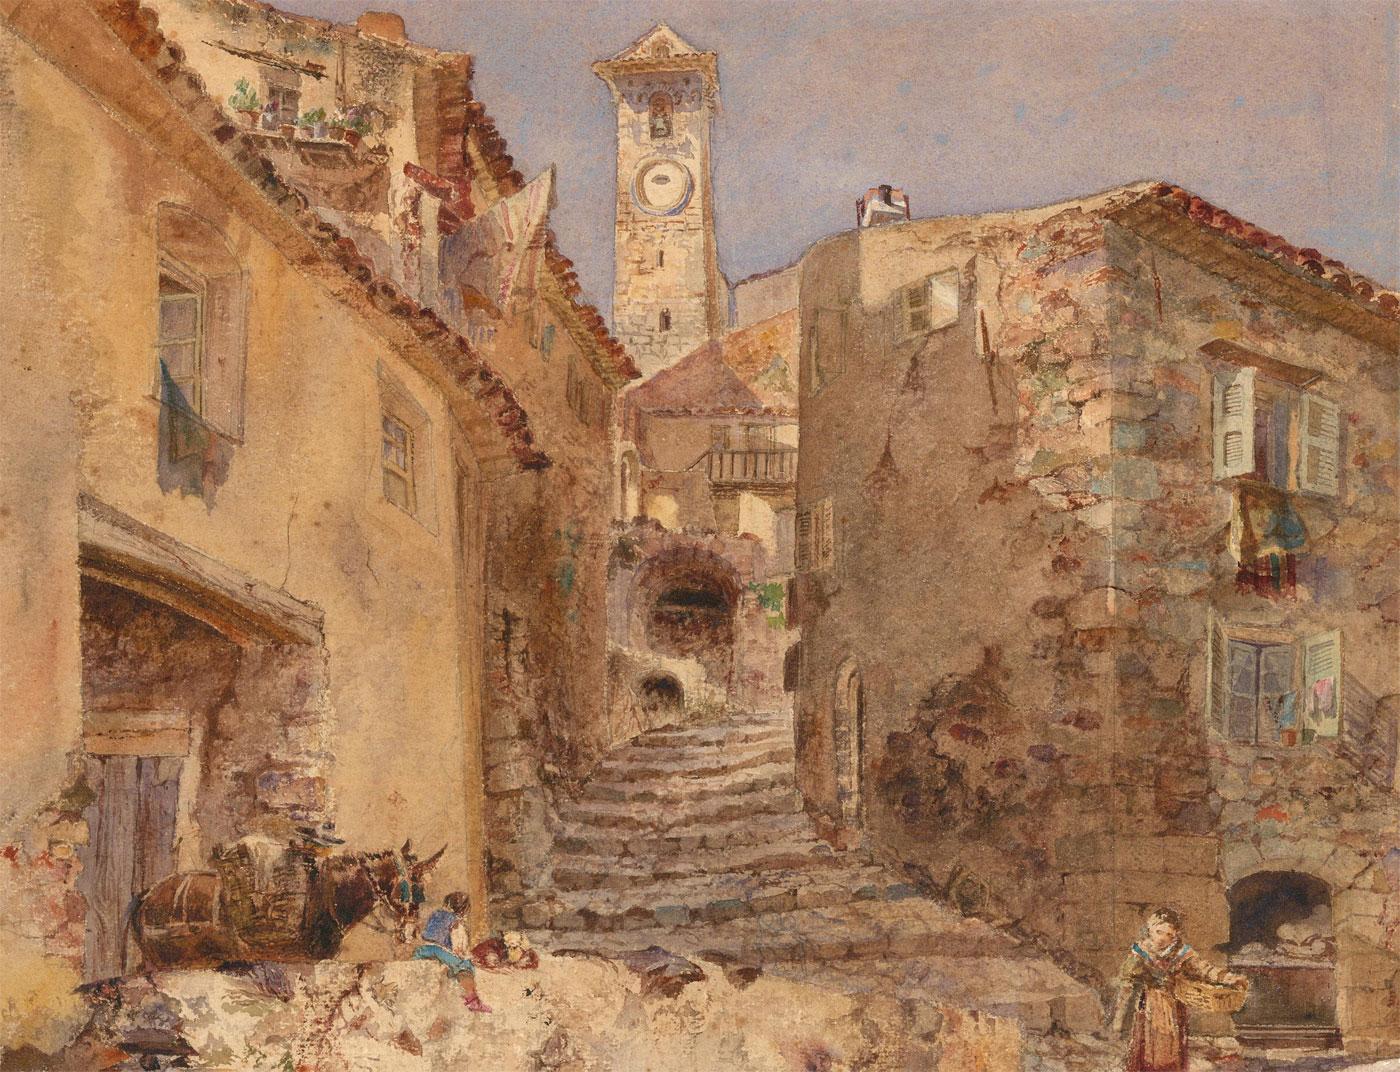 This charming watercolour scene transports us to the back streets of Cannes, France. The winding stairs of the old town street leads past stone houses up to a clock tower. In the foreground a woman carries a wicker basket and a boy perches next to